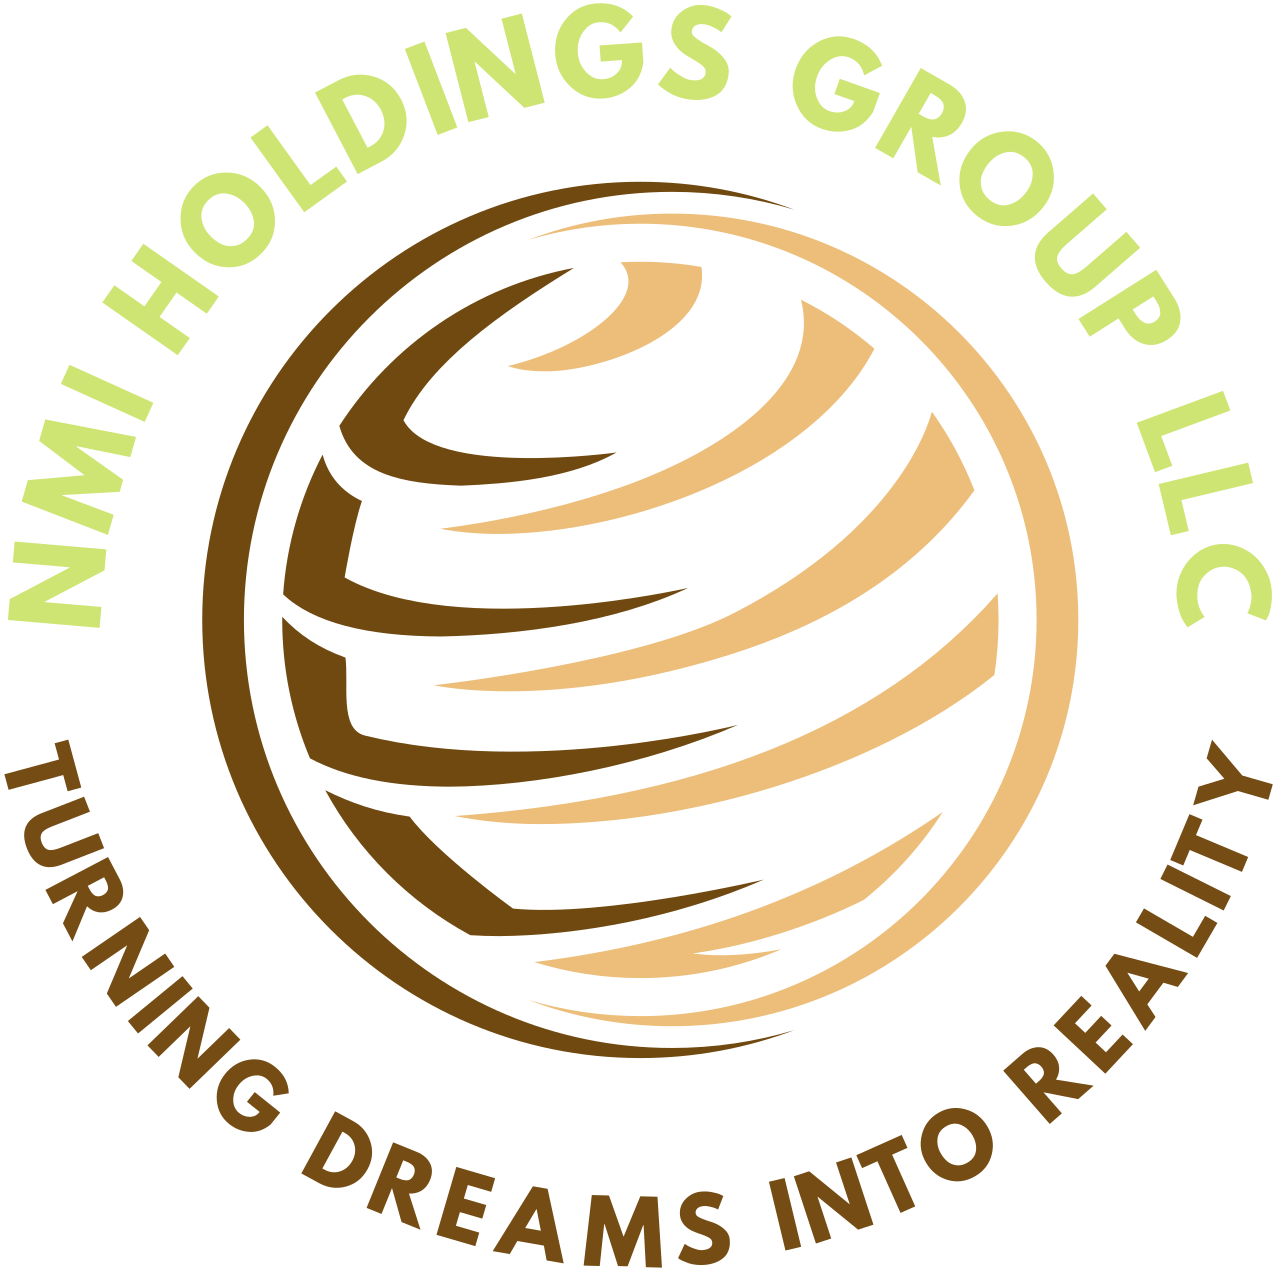 NMI HOLDINGS GROUP LLC's web page